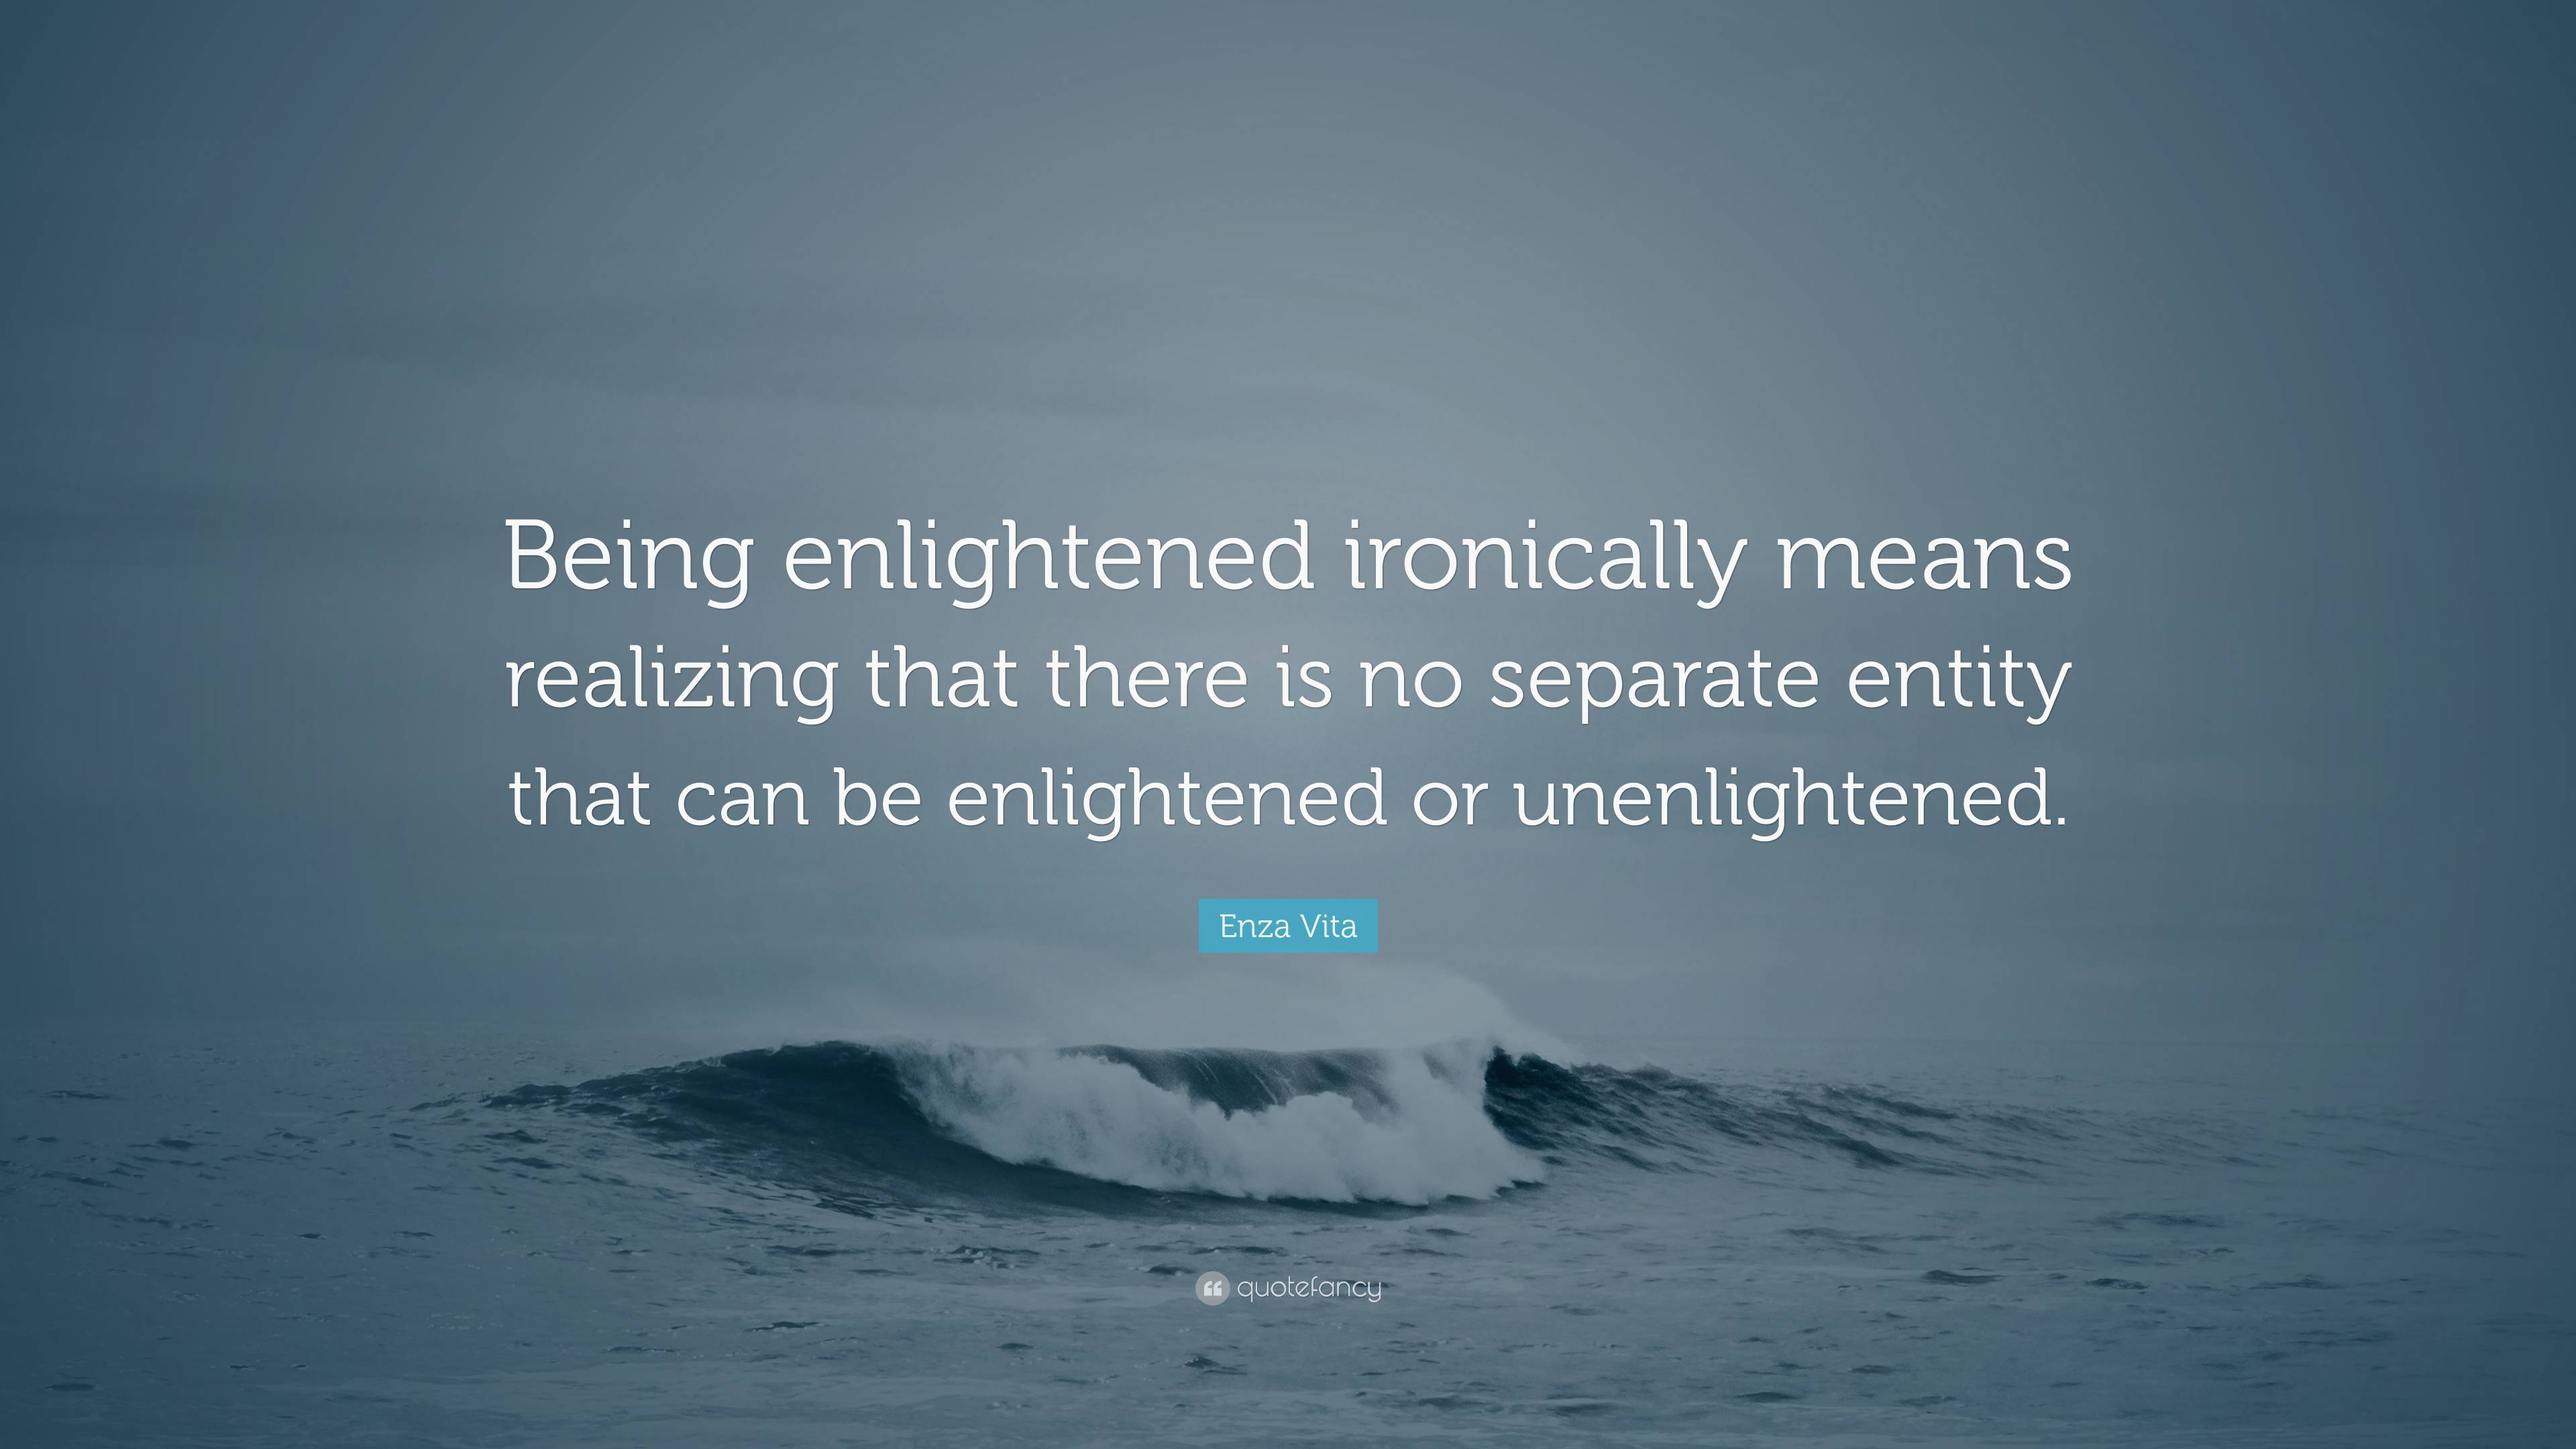 Enza Vita Quote: “Being enlightened ironically means realizing that ...